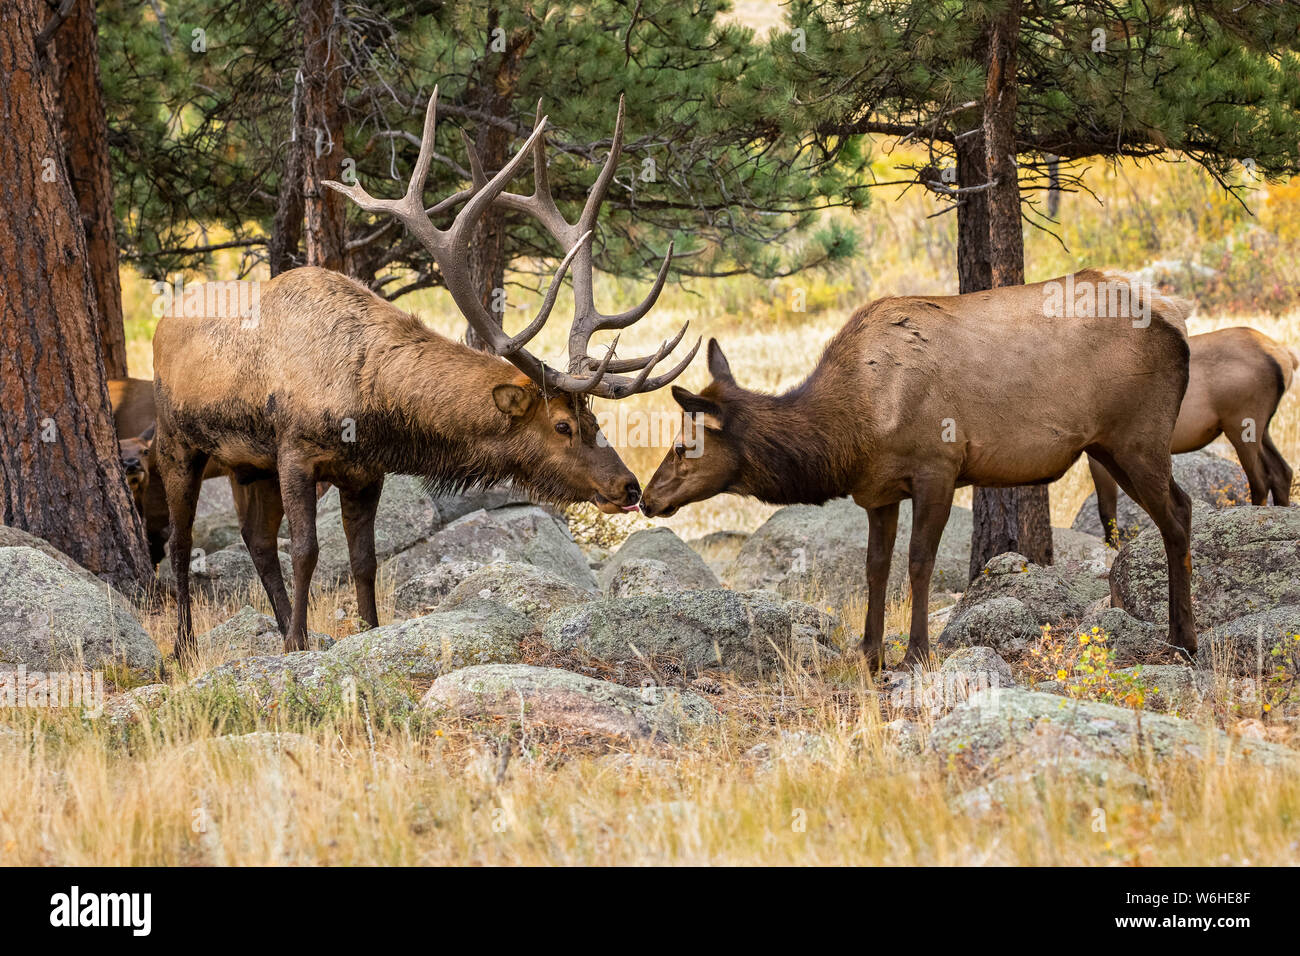 Bull elk (Cervus canadensis) with cow and calf; Denver, Colorado, United States of America Stock Photo